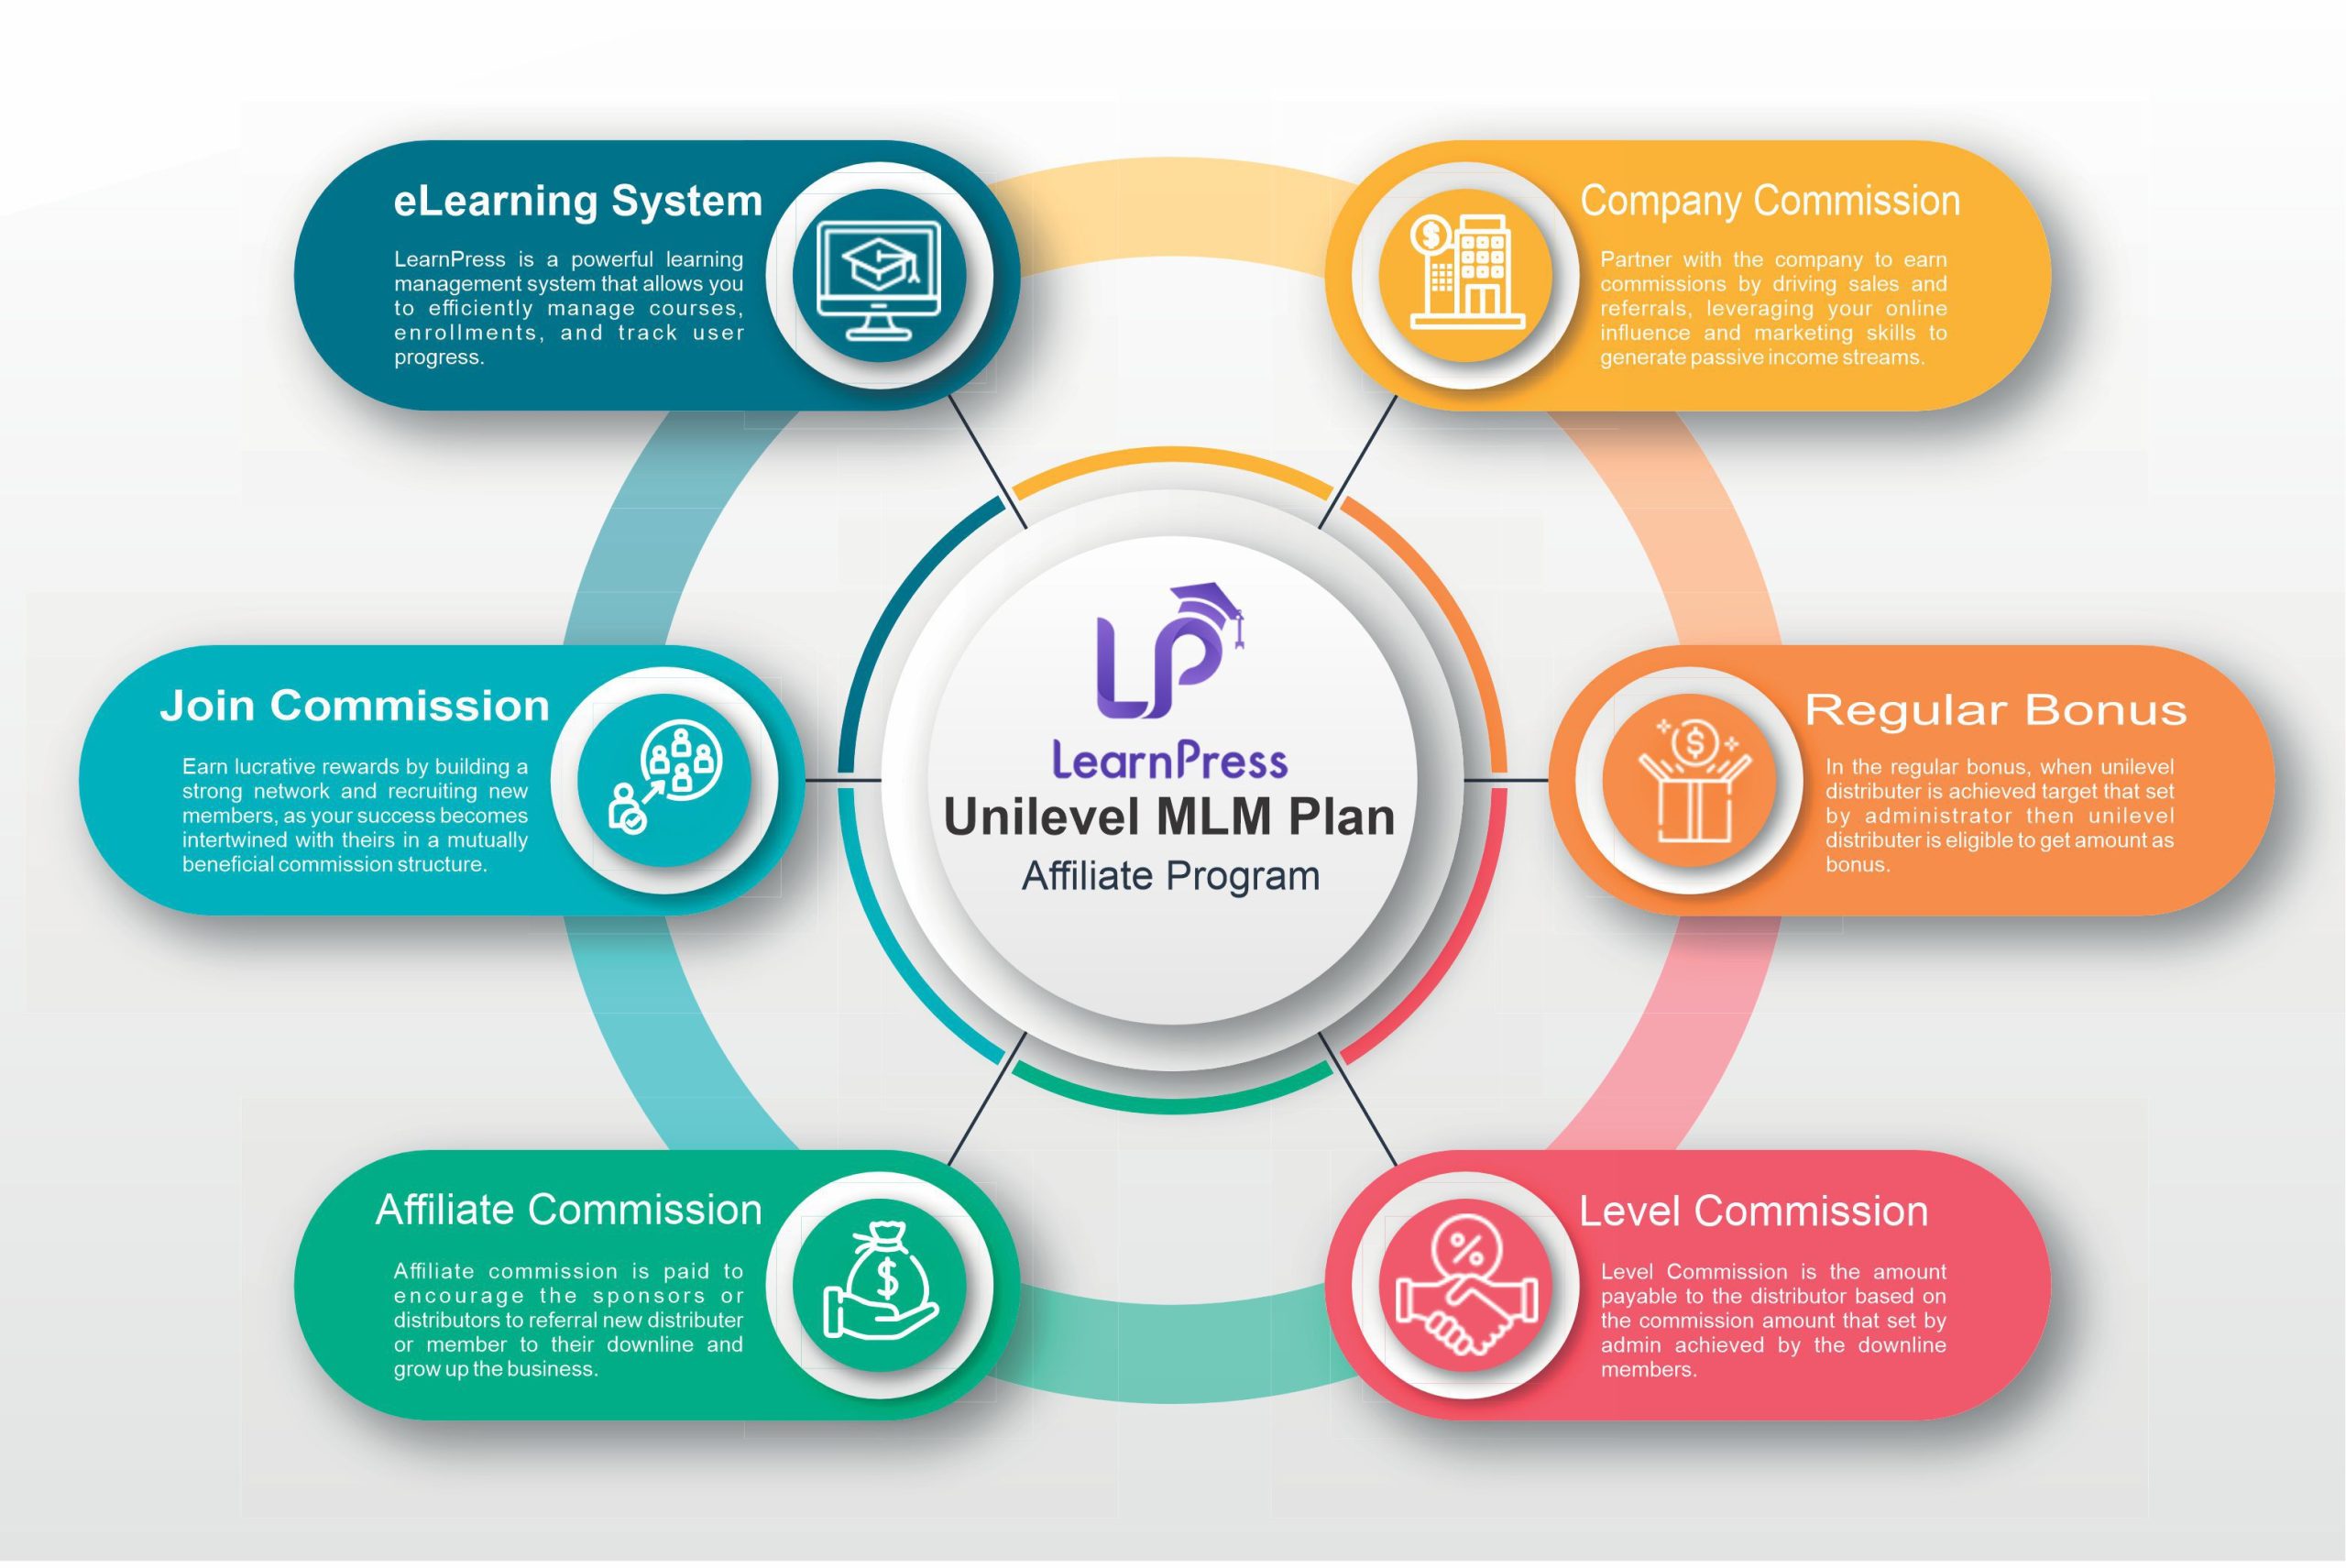 learnpress referral affiliate plugin, learnpress multilevel affiliate plugin, affiliate plugin, learnpress mlm plugin, ultimate affiliate pro, unilevel MLM, unilevel marketing, Free Demo Unilevel MLM LearnPress, unilevel, Unilevel MLM Plan for LearnPress, eLearning MLM Affiliate Software, Unilevel MLM LearnPress Plugin, unilevel vs binary, Unilevel MLM Plan for LearnPress, Unilevel eLearning MLM Affiliate, unilevel mlm software, best online course affiliate programs, university affiliate programs, school supplies affiliate program, college affiliate programs education affiliate programs, best affiliate programs, learning affiliate, mlm affiliate learnpress, learnpress mlm plugin download, Connect AffiliateWP to LearnPress, What Is a Learning Management System LMS, Learning management system, Free Demo LMS Platform - Learning Management System, Open LMS, Open LMS MLM Genealogy, Affiliate LMS MLM Genealogy, Genealogy Tree in Network Marketing, Genealogy Tree in LearnPress, customizing LearnPress website LMS, Customize LearnPress page, LearnPress Customization Development Services, WpAffiliate - LearnPress plugins, Affiliate LearnPress, WordPress Plugins